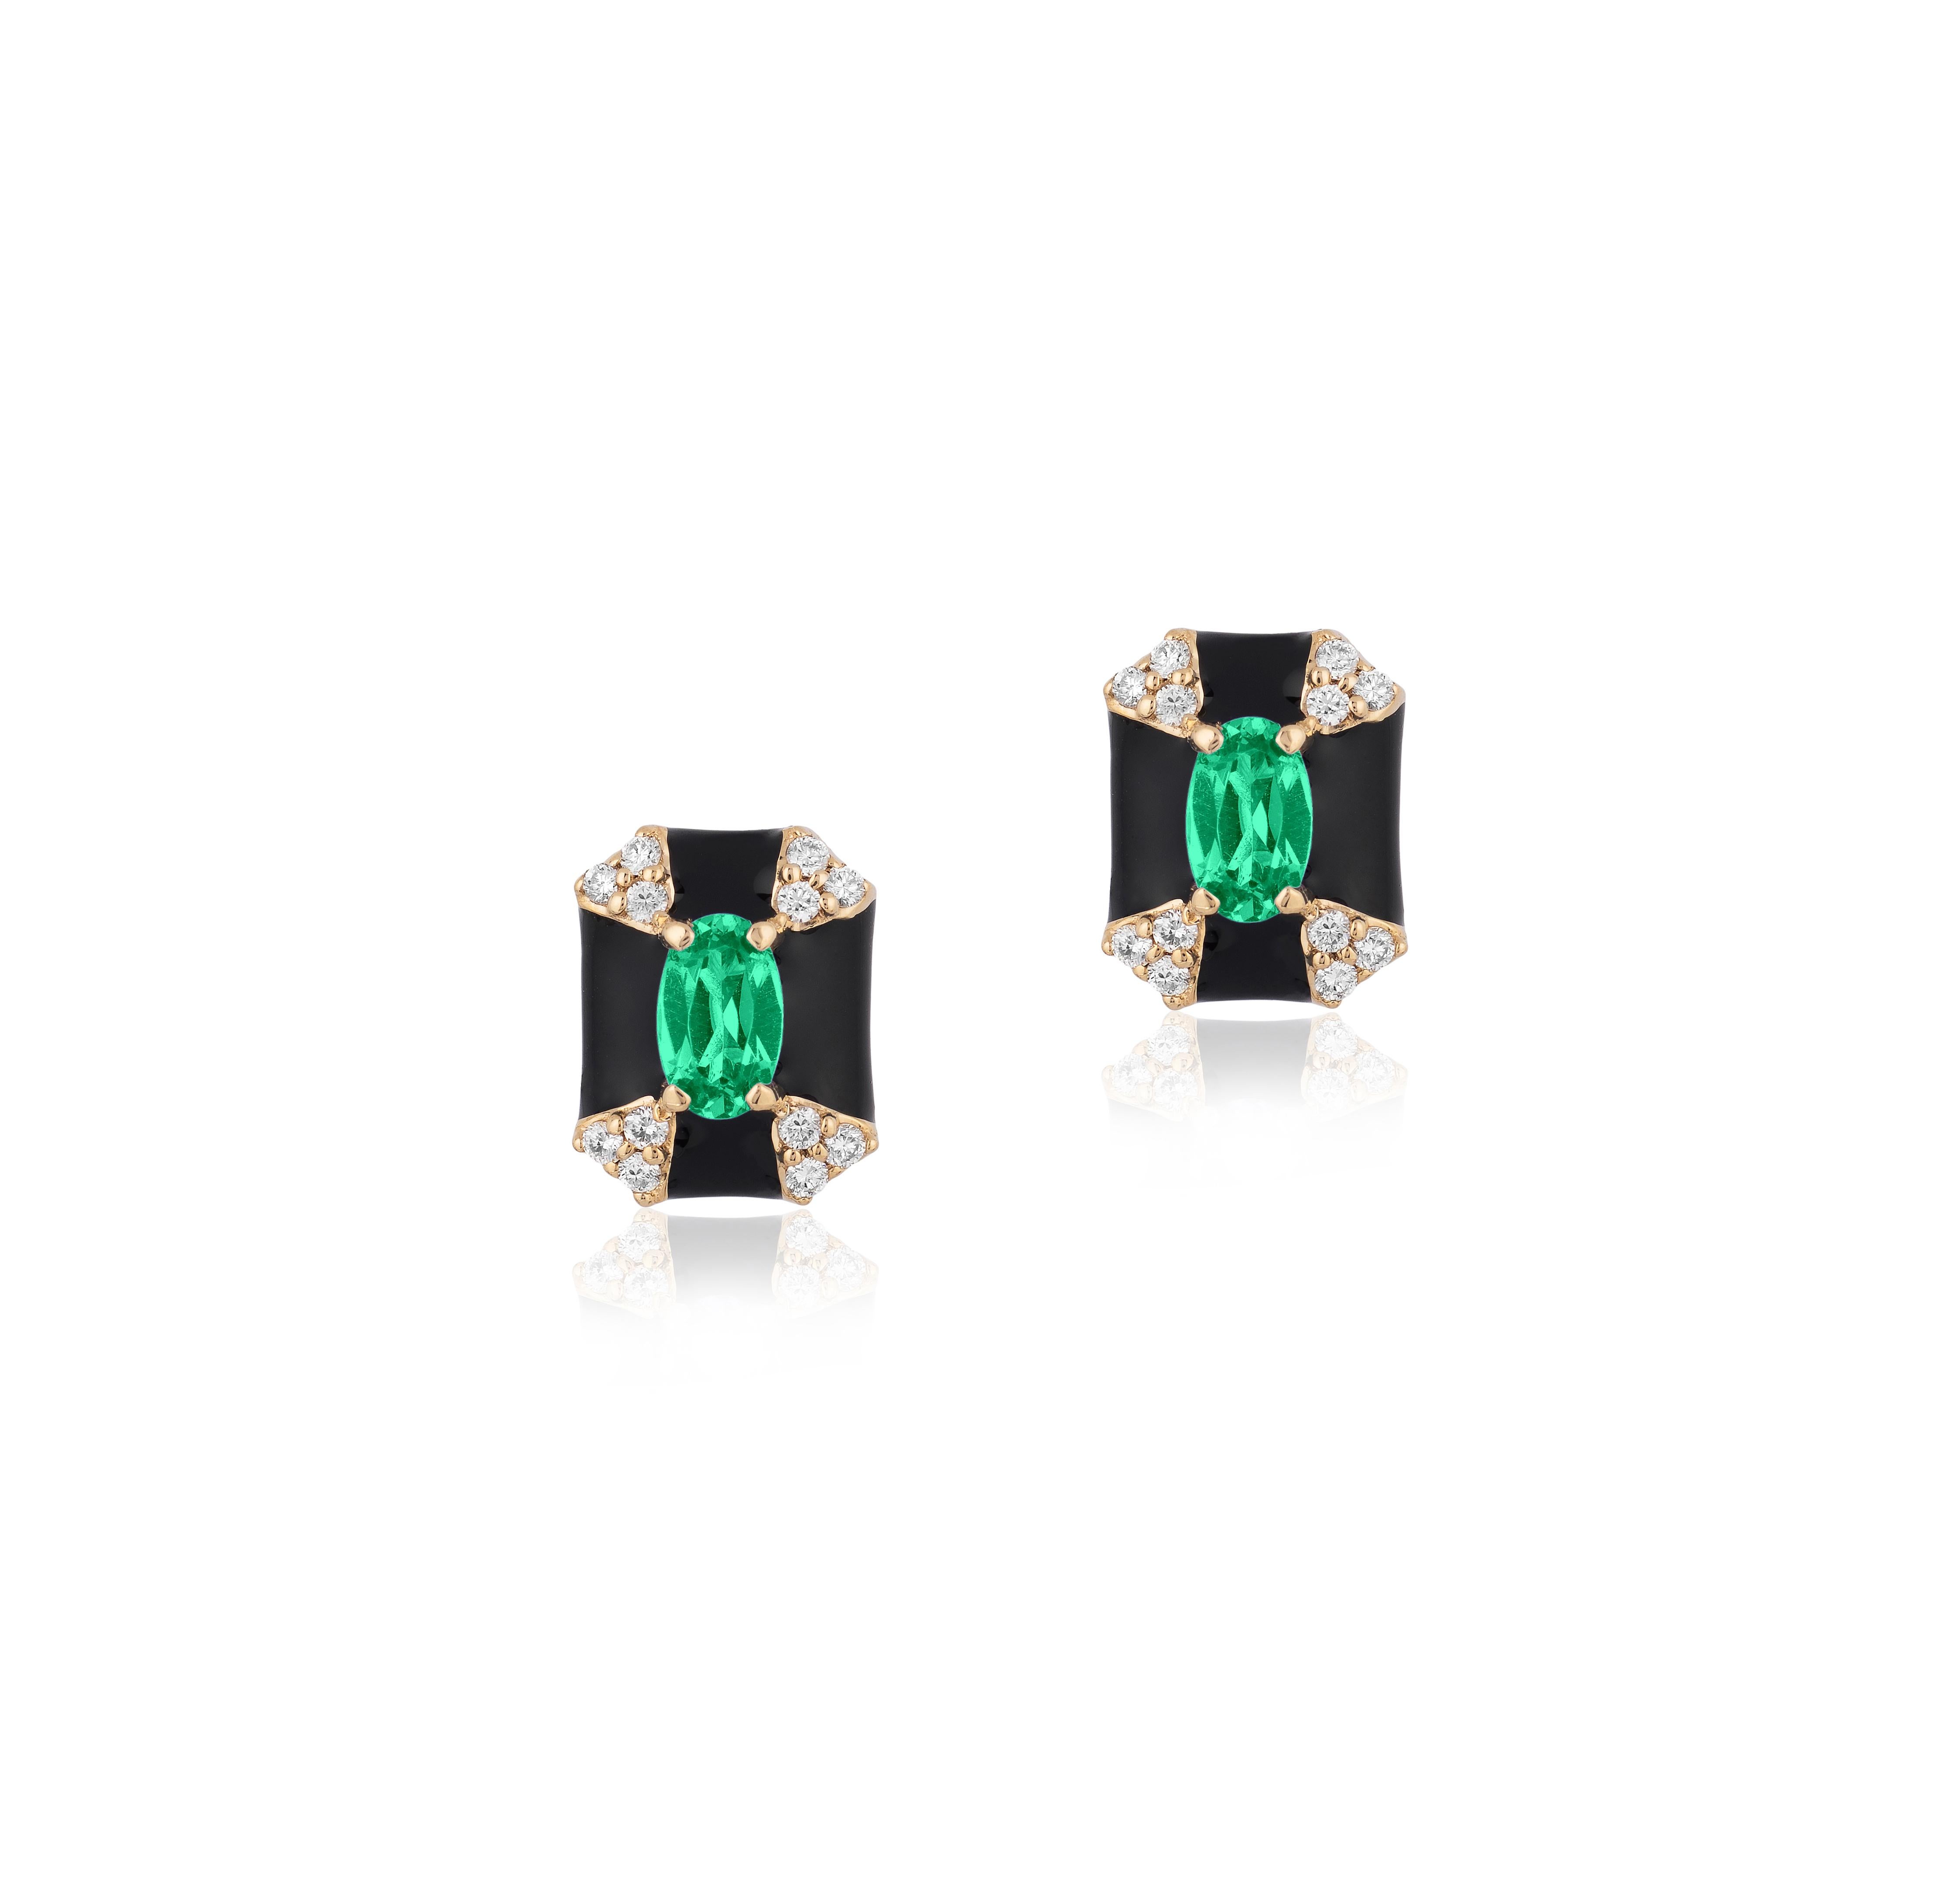 'Queen' Octagon Black Enamel Stud Earrings with Emerald and Diamonds in 18K Yellow Gold
Stone Size: 4 mm
Gemstone Approx. Wt: Emerald- 0.39 Carats 
Diamonds: G-H / VS, Approx. Wt: 0.14 Carats